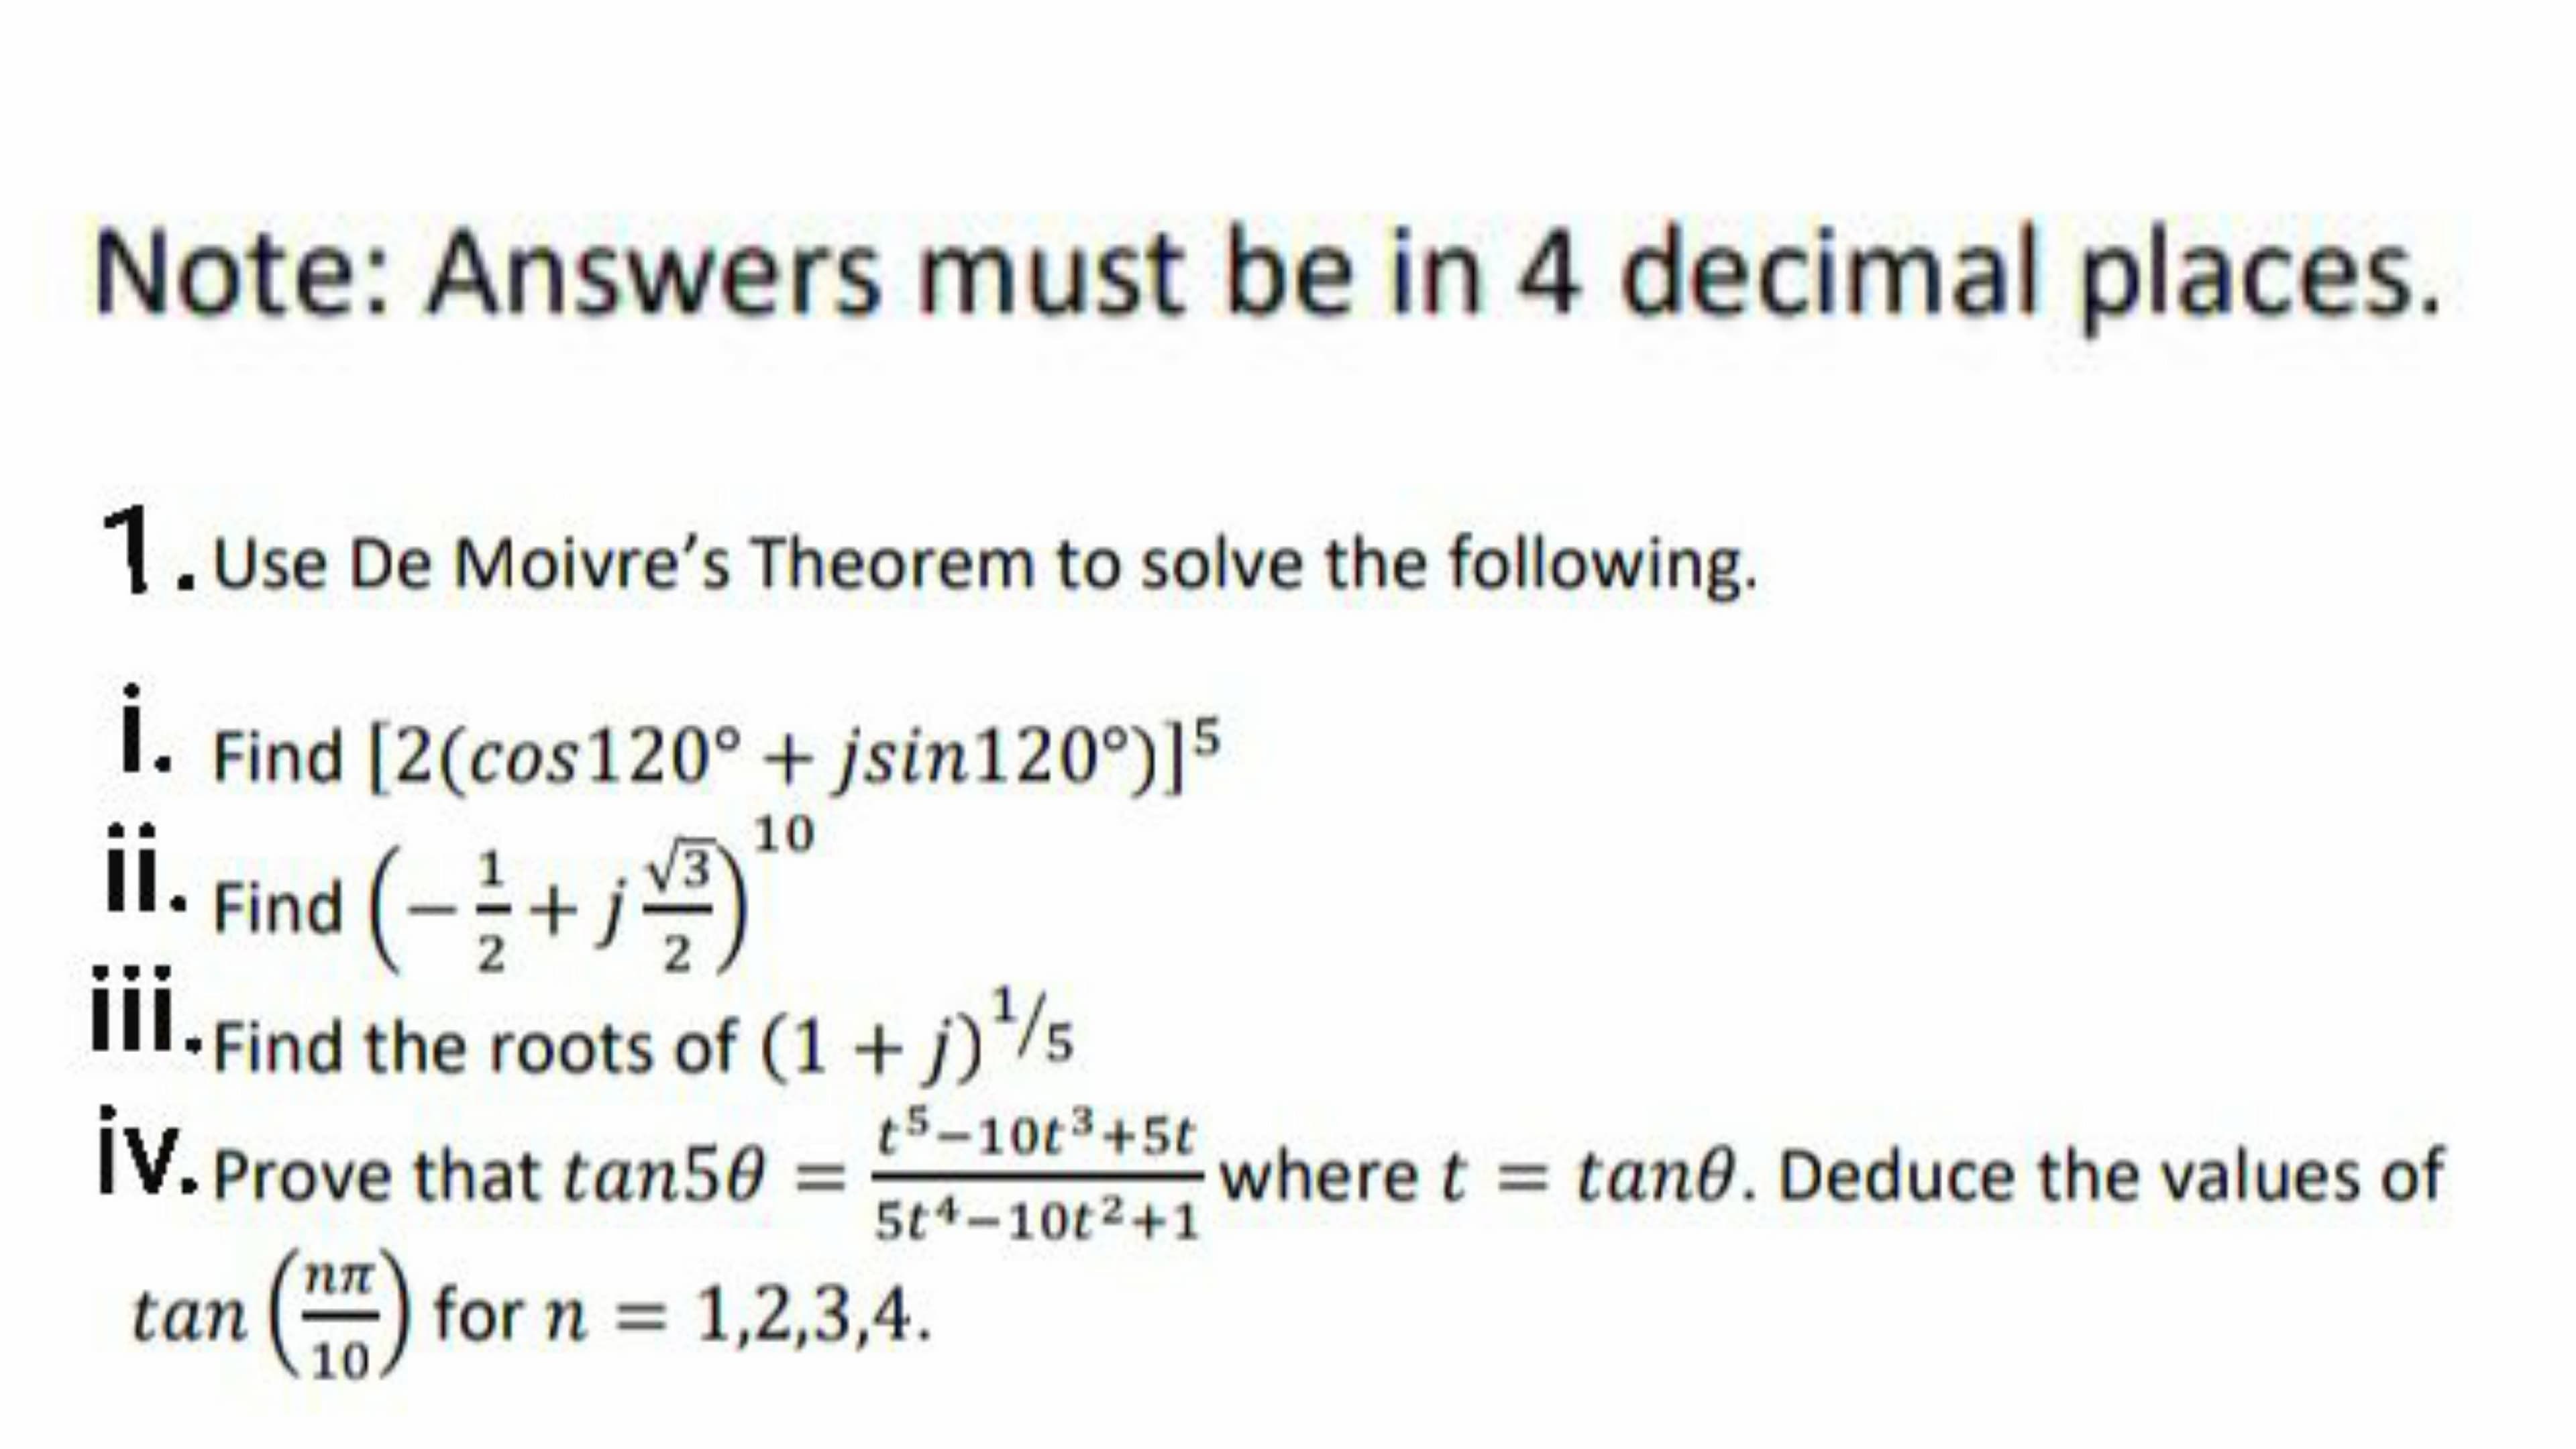 Note: Answers must be in 4 decimal places.
1.Use De Moivre's Theorem to solve the following.
I. Find [2(cos120° + jsin120°)]5
i.
ii. Find (-+j
10
부
III.Find the roots of (1 + j)*/5
t5-10t3+5t
iV. Prove that tan50
where t = tan0. Deduce the values of
5t4-10t2+1
nn
tan
for n = 1,2,3,4.
10
